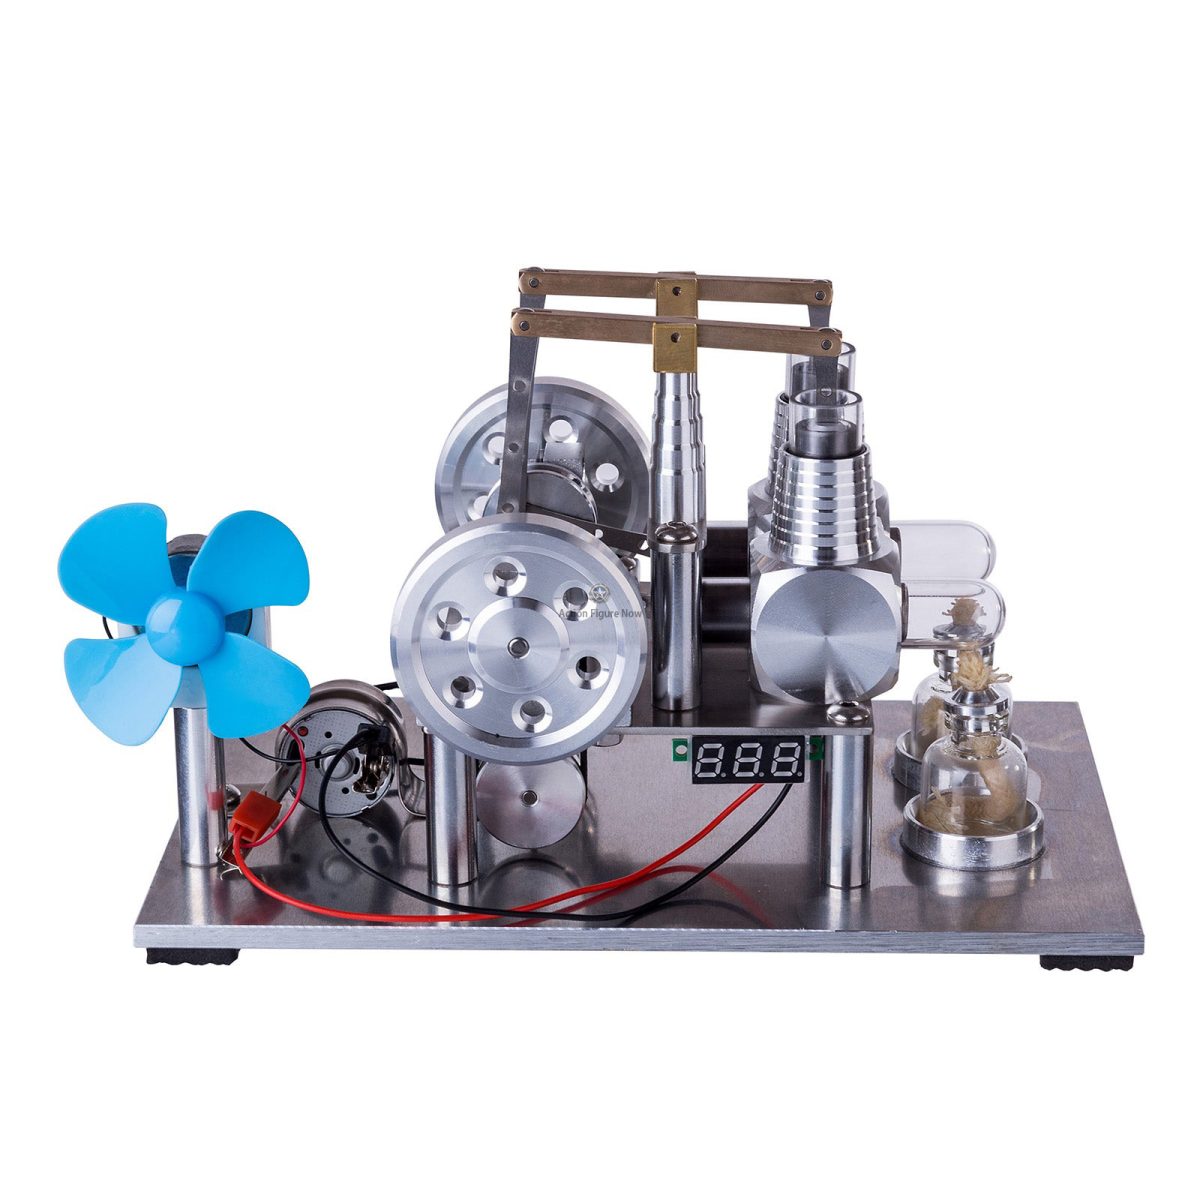 2-Cylinder Hot Air Stirling Engine Electricity Generator with LED Bulb, Voltage Meter, and Fan - DIY STEM Physics Toy